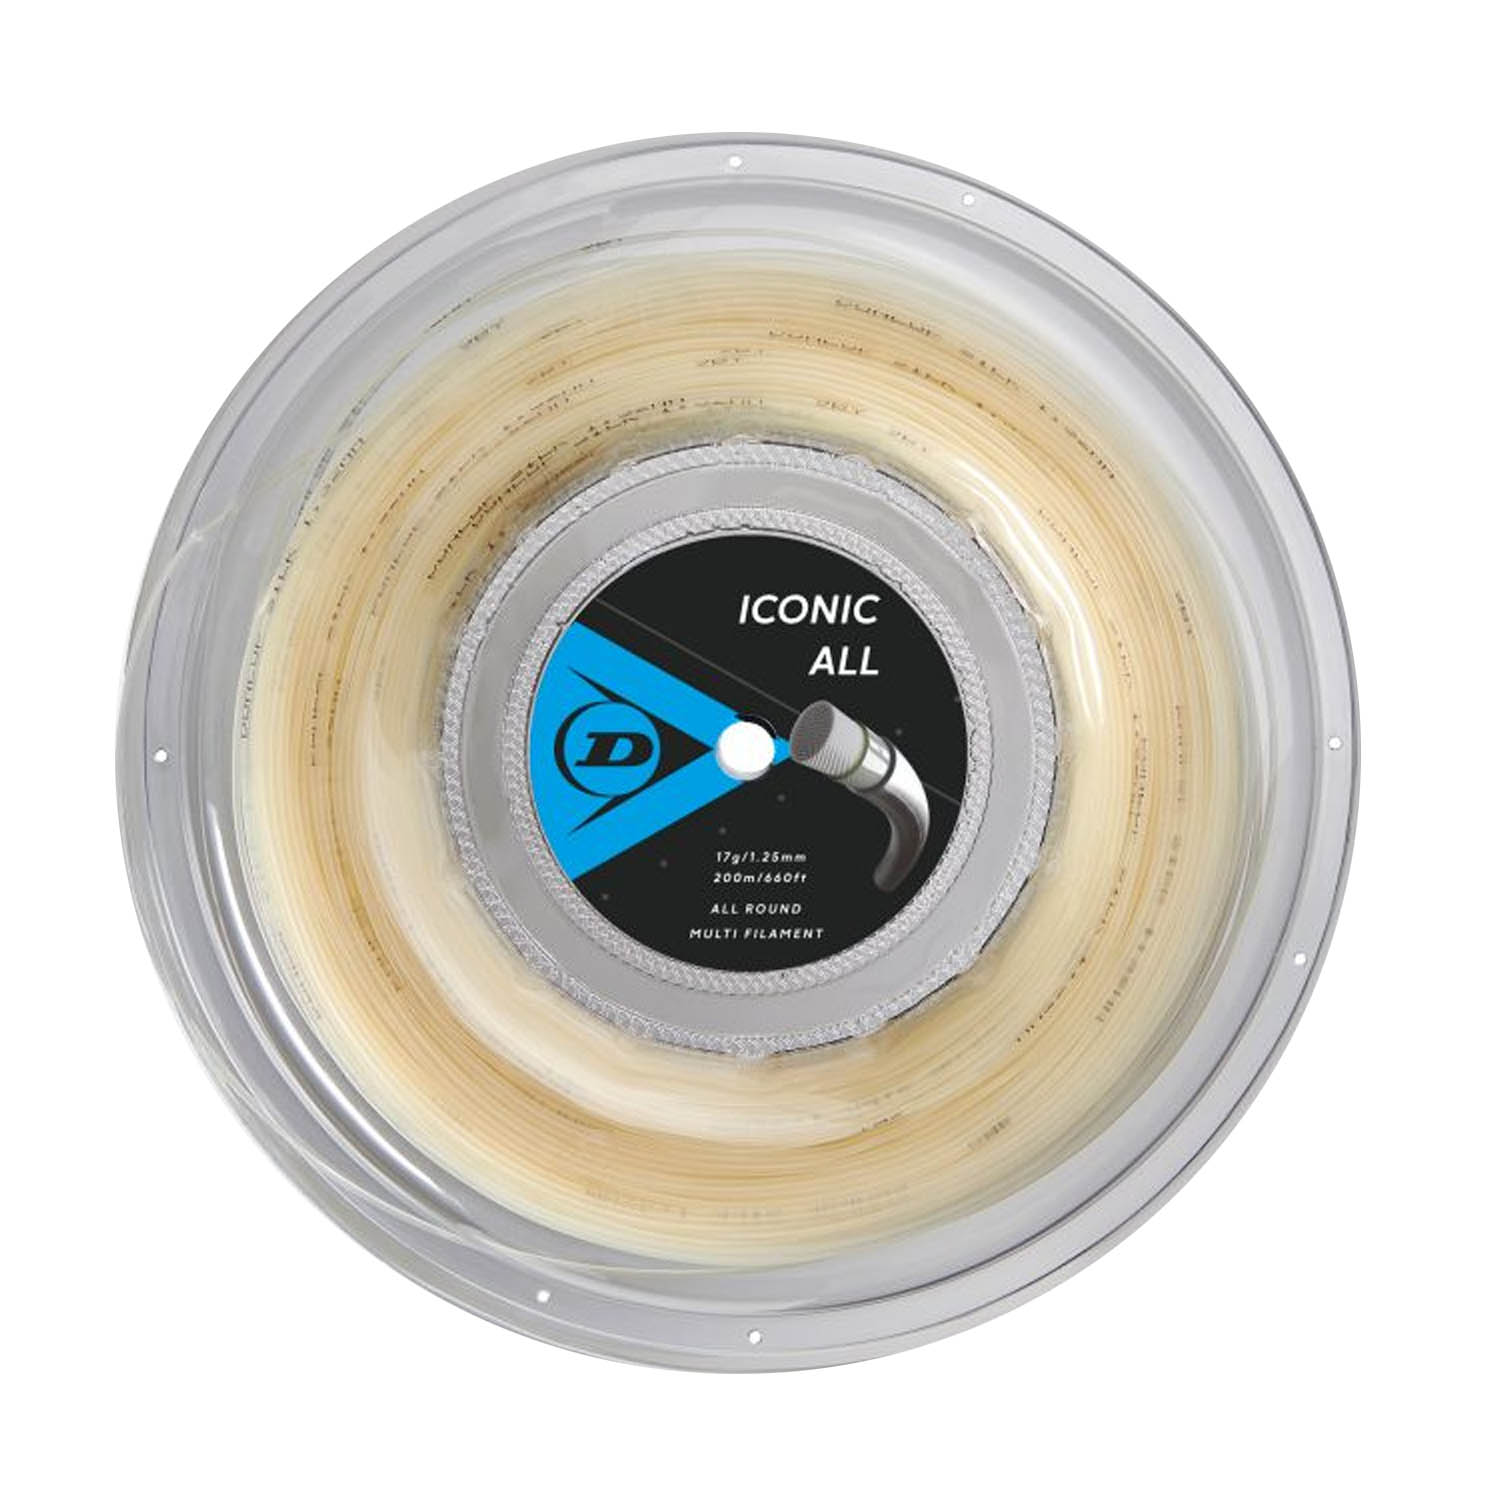 Dunlop Iconic All 1.30 200 m String Reel - Natural